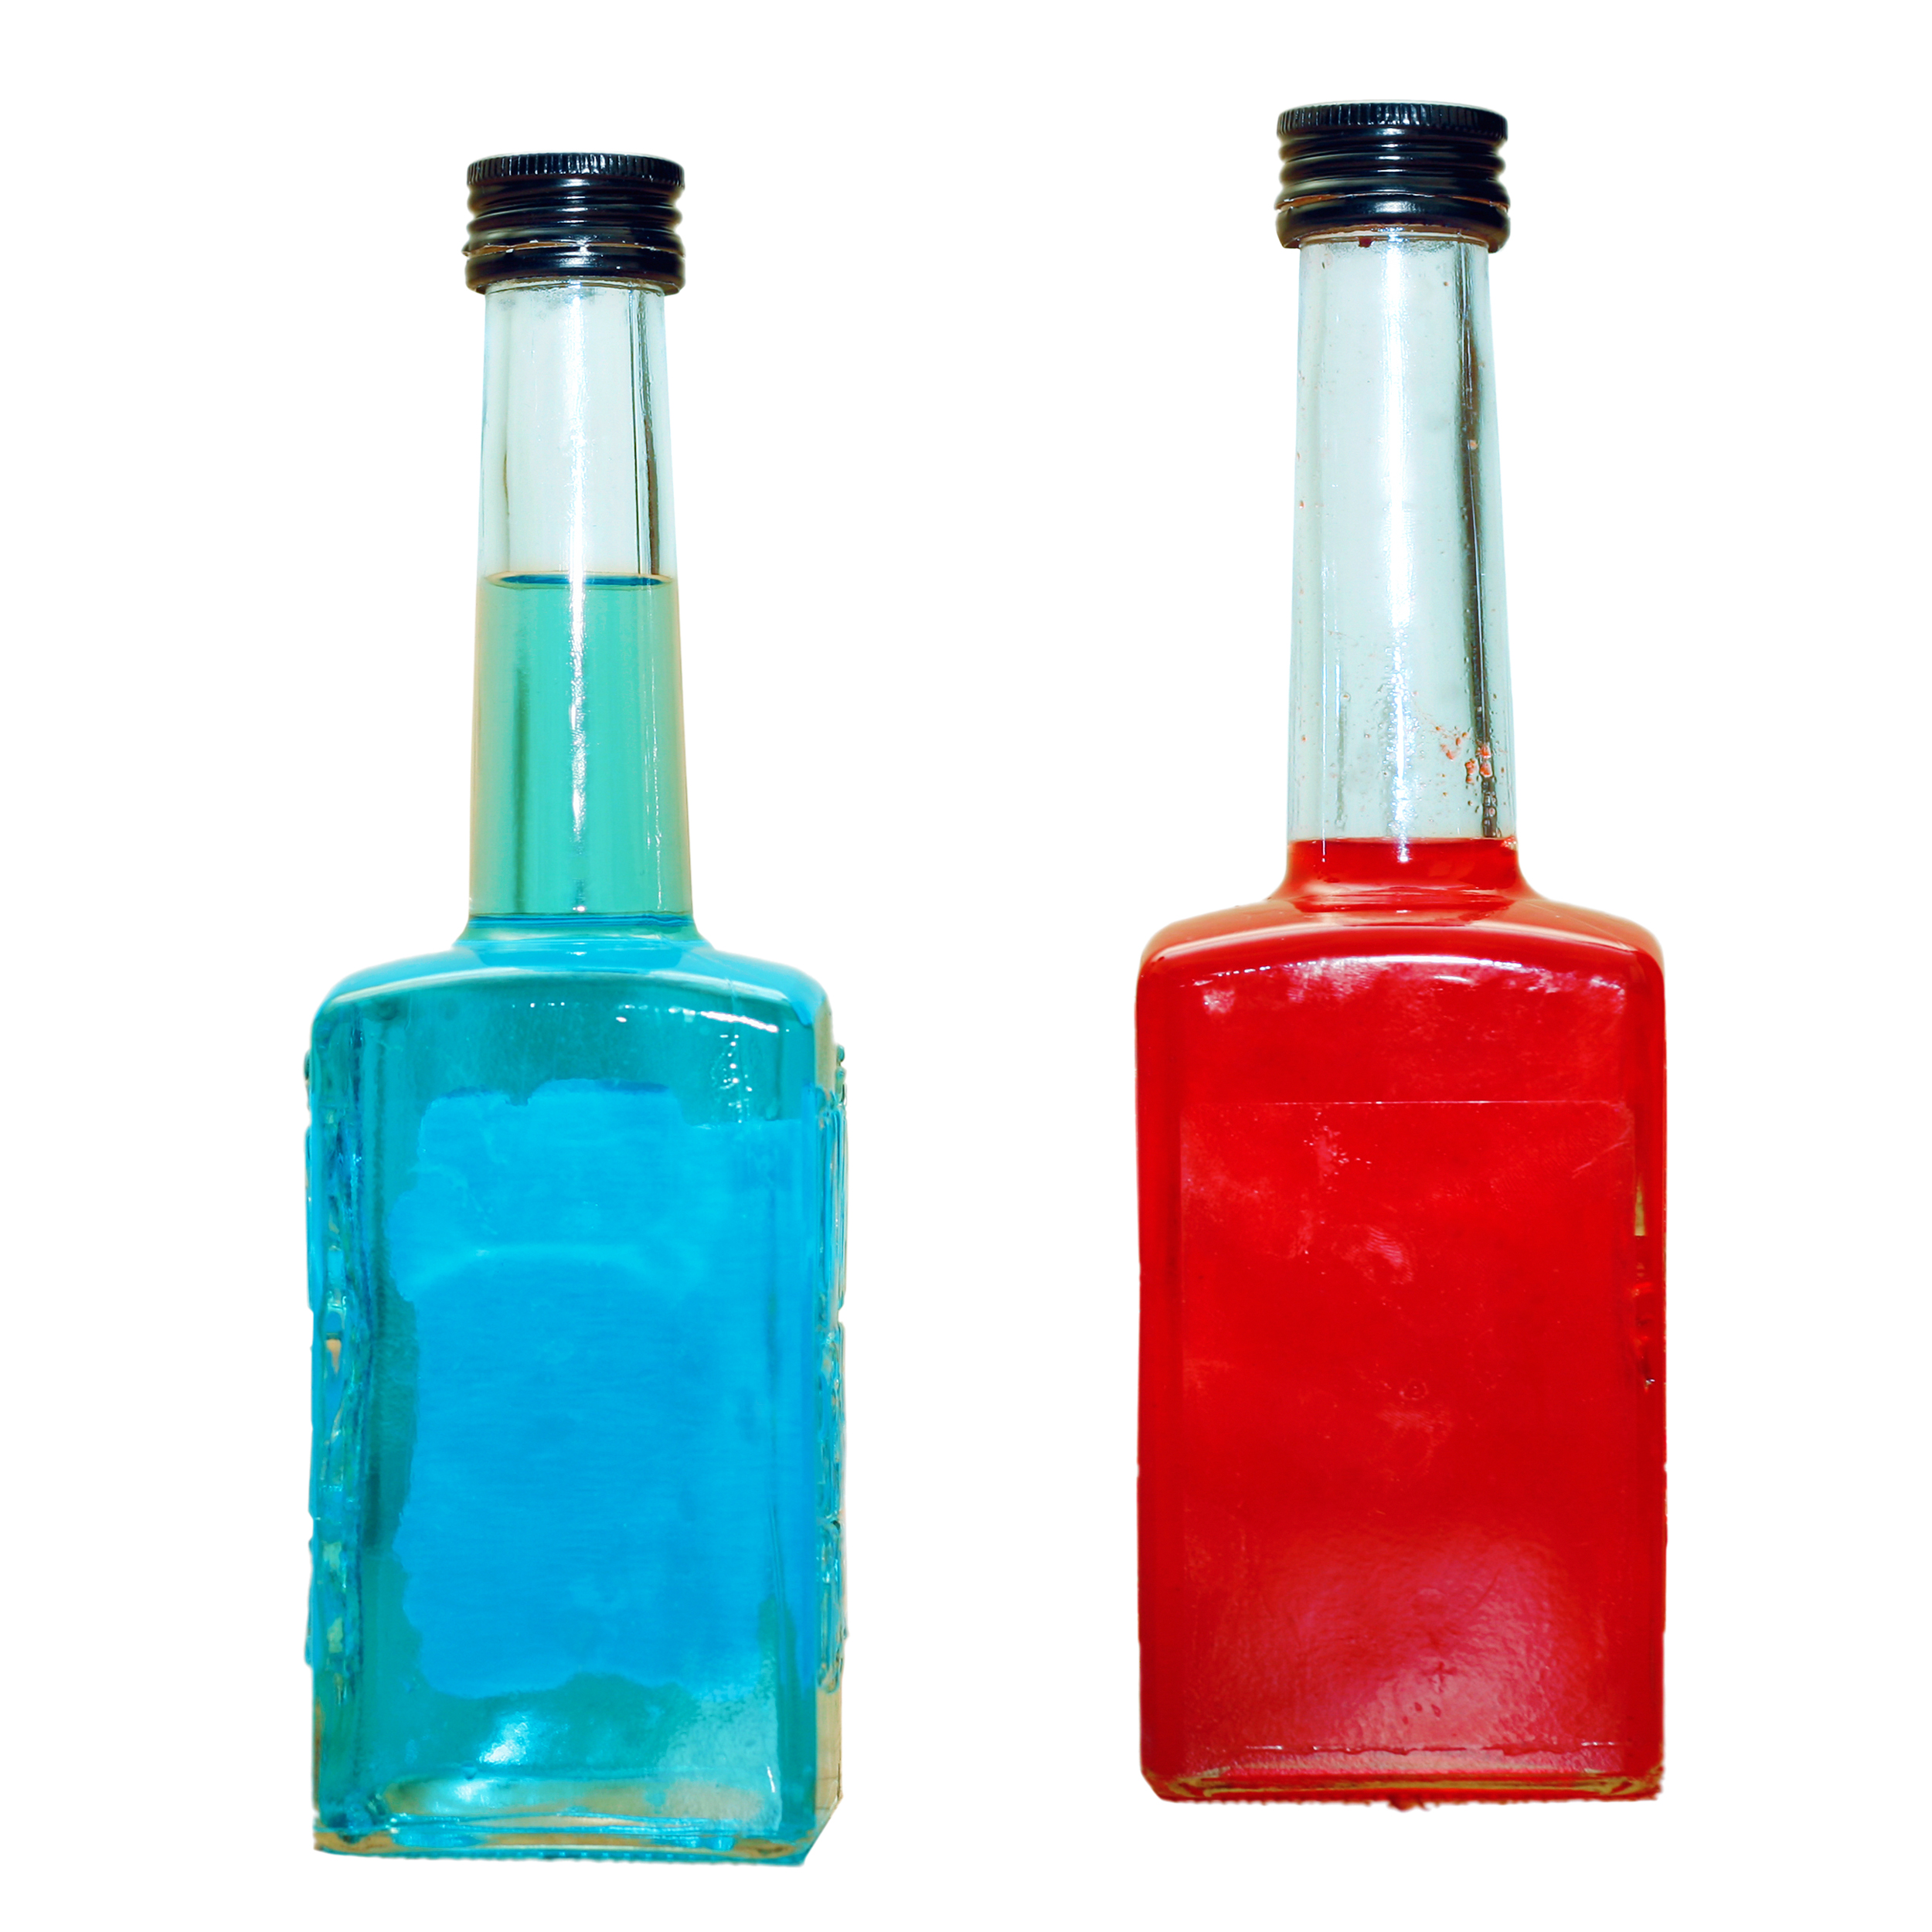 Red and blue bottles photo